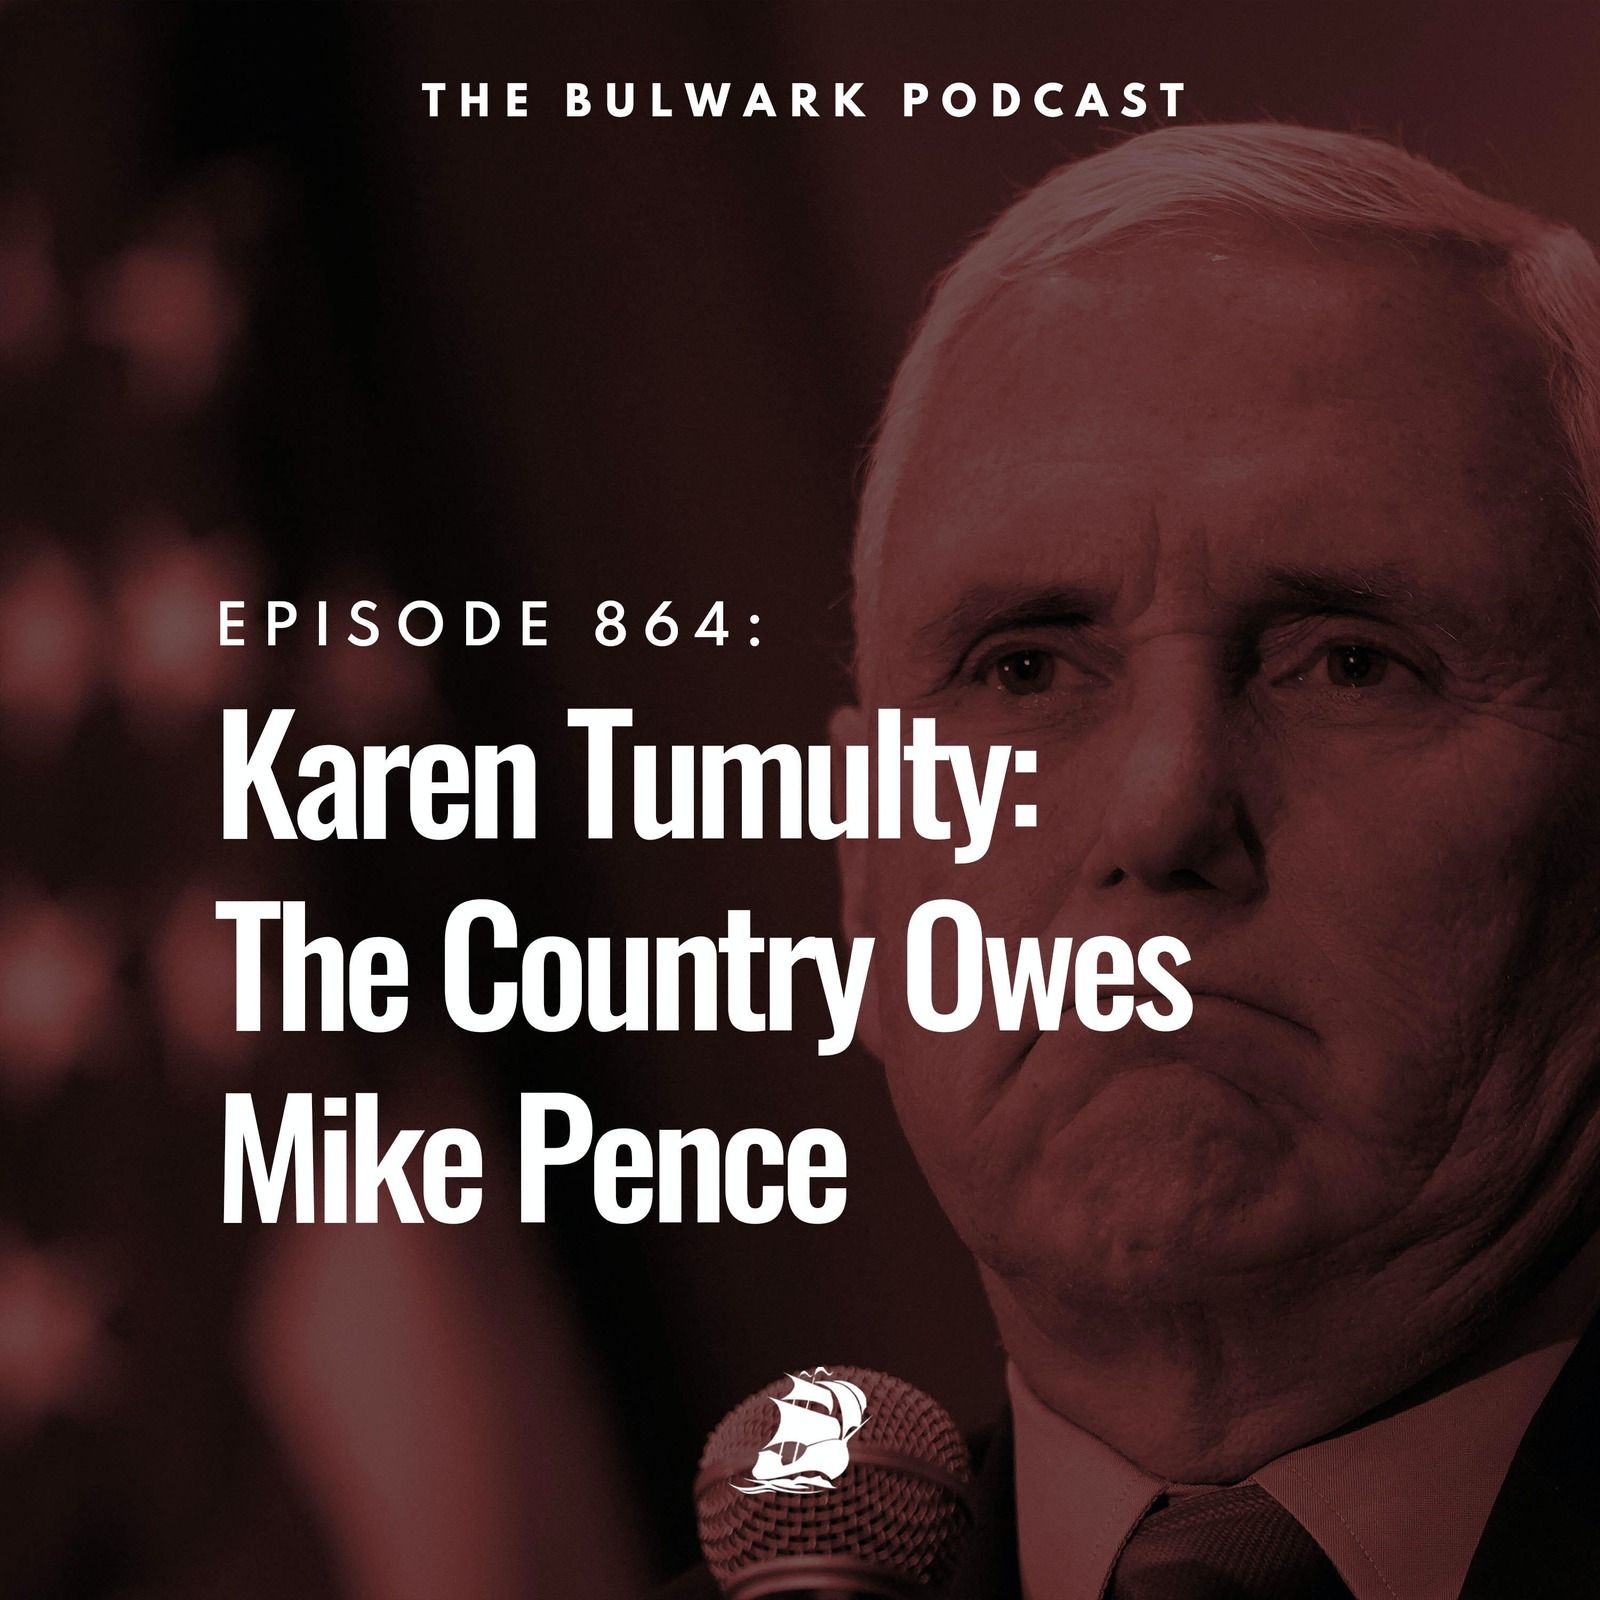 Karen Tumulty: The Country Owes Mike Pence by The Bulwark Podcast